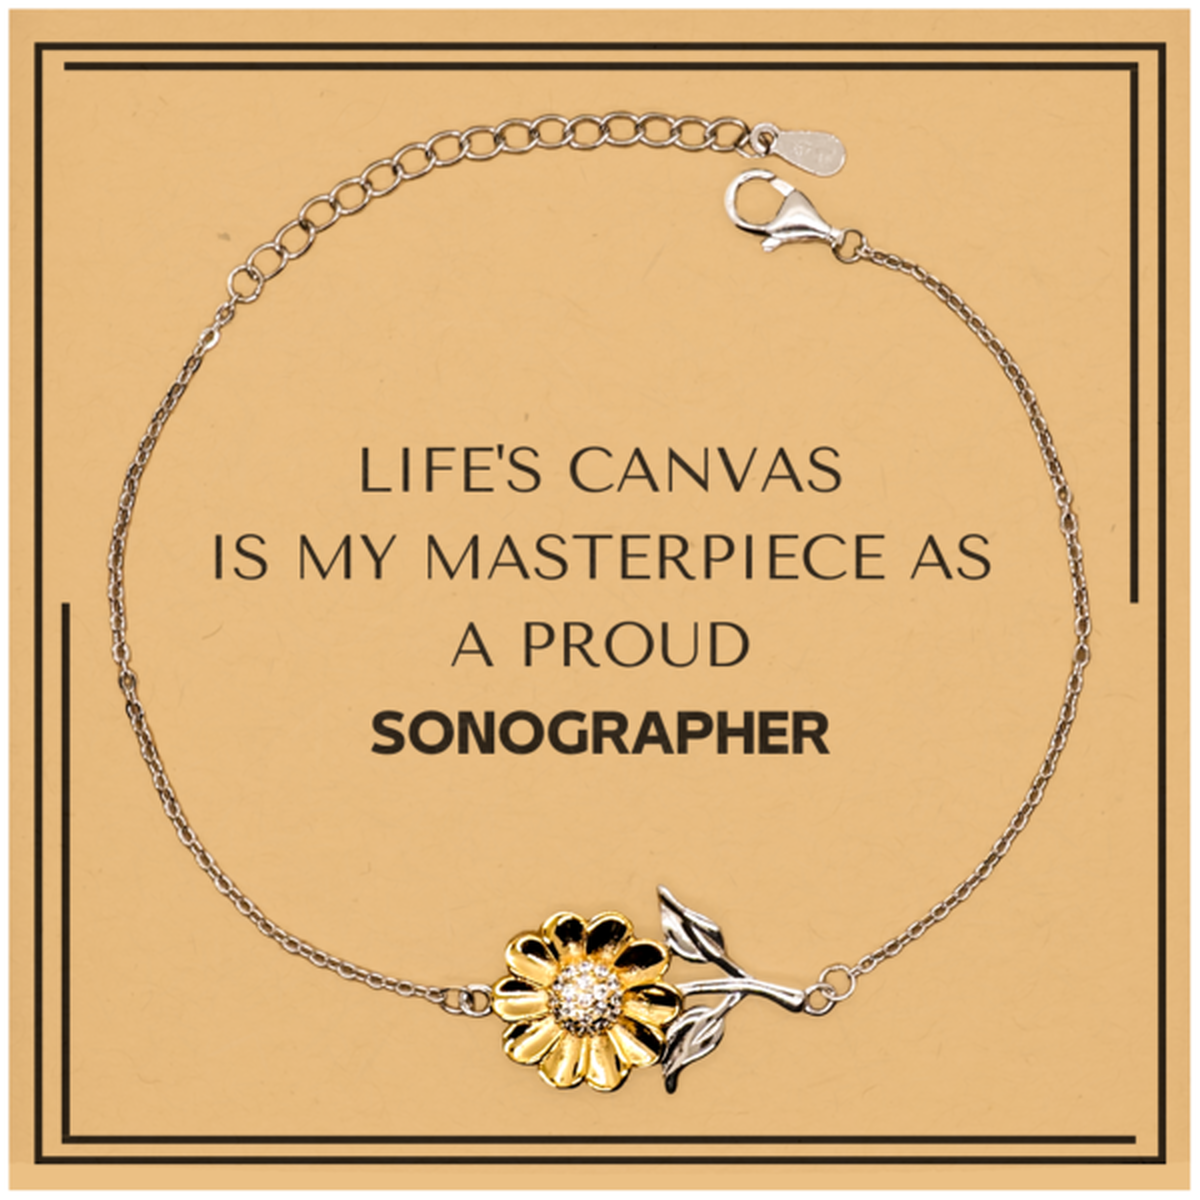 Proud Sonographer Gifts, Life's canvas is my masterpiece, Epic Birthday Christmas Unique Sunflower Bracelet For Sonographer, Coworkers, Men, Women, Friends